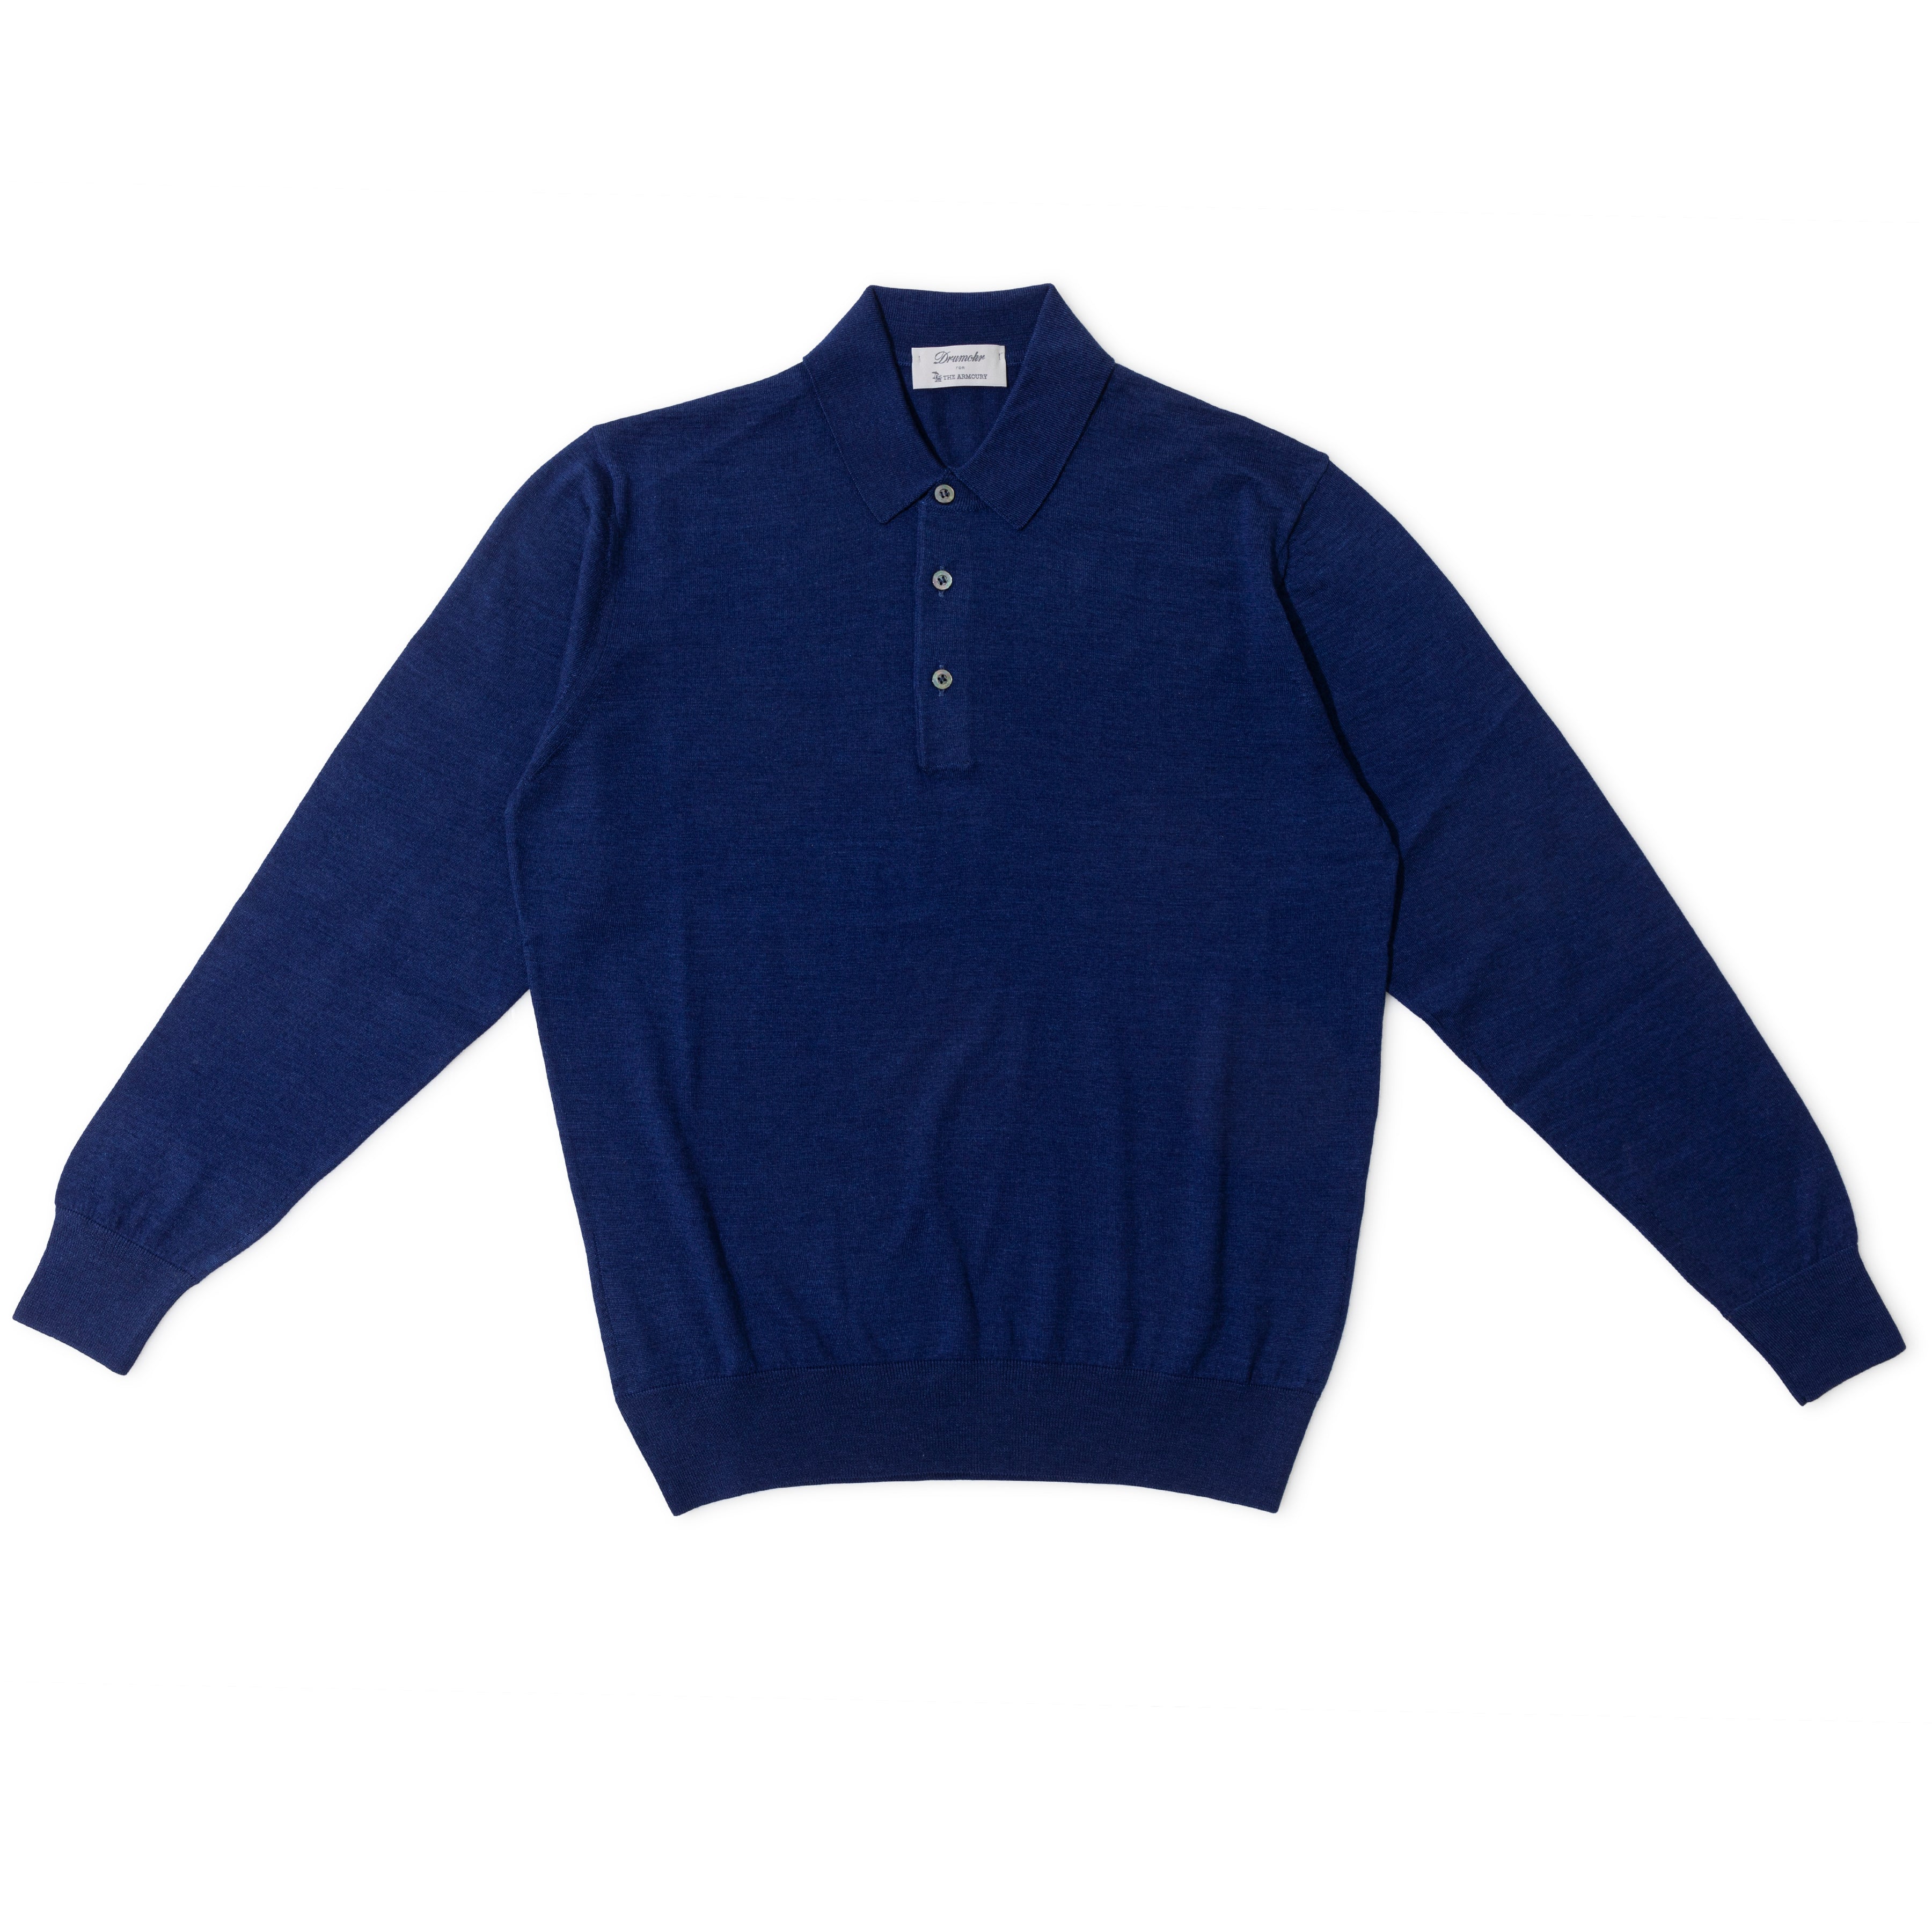 Wool/Silk/Cashmere Knit Polo - The Armoury